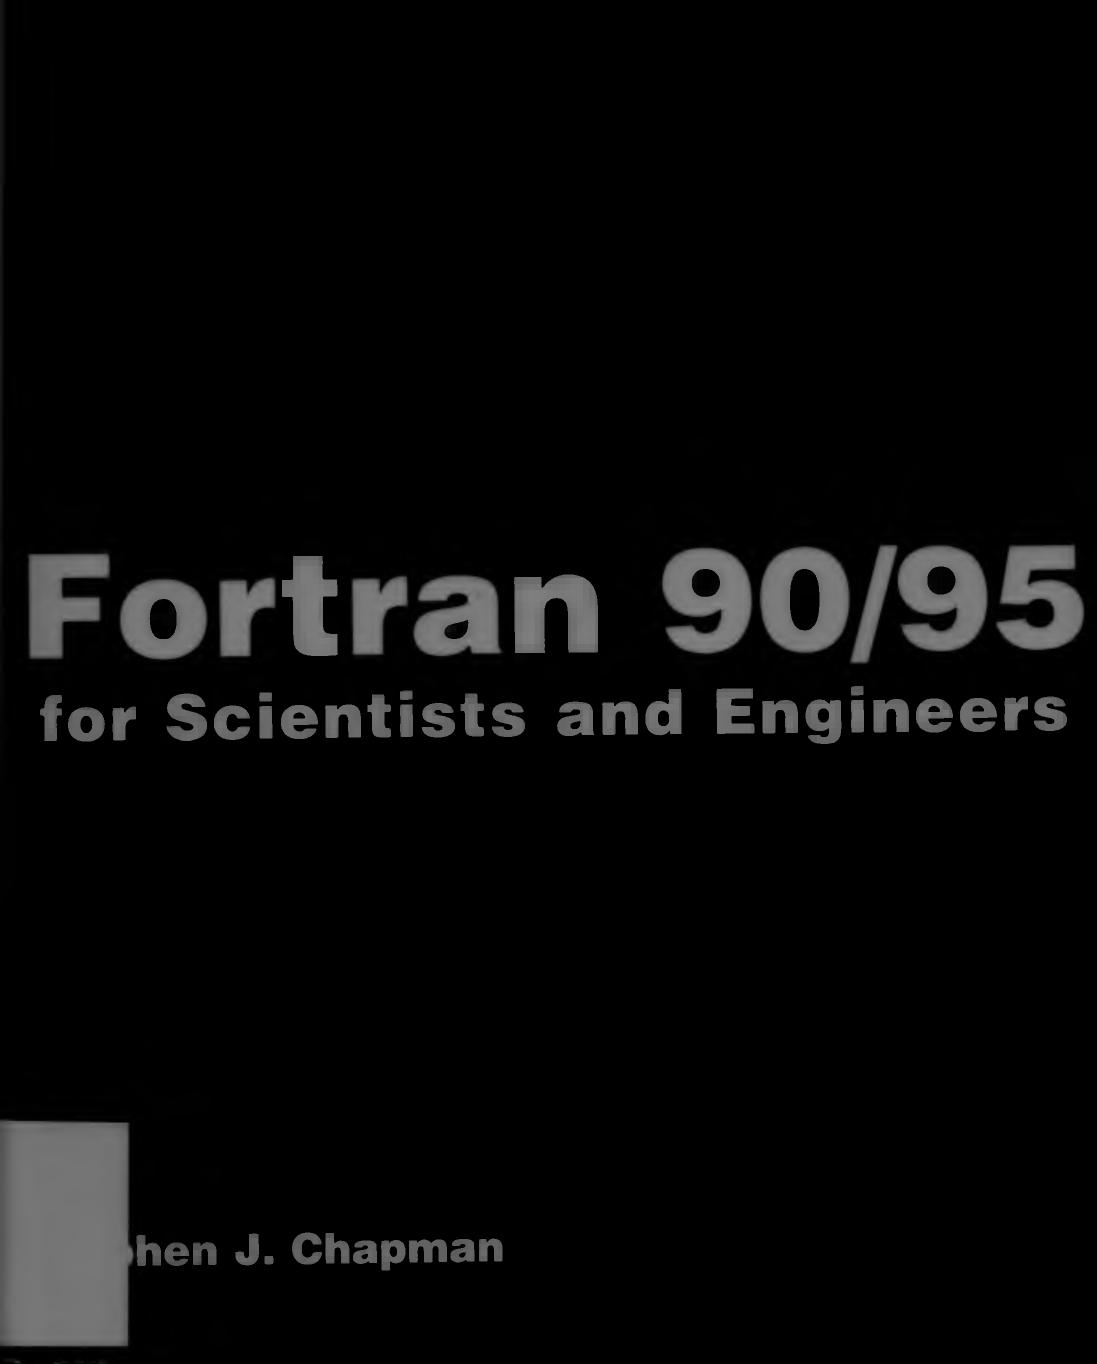 Fortran 90/95 for scientists and engineers by Stephen J. Chapman